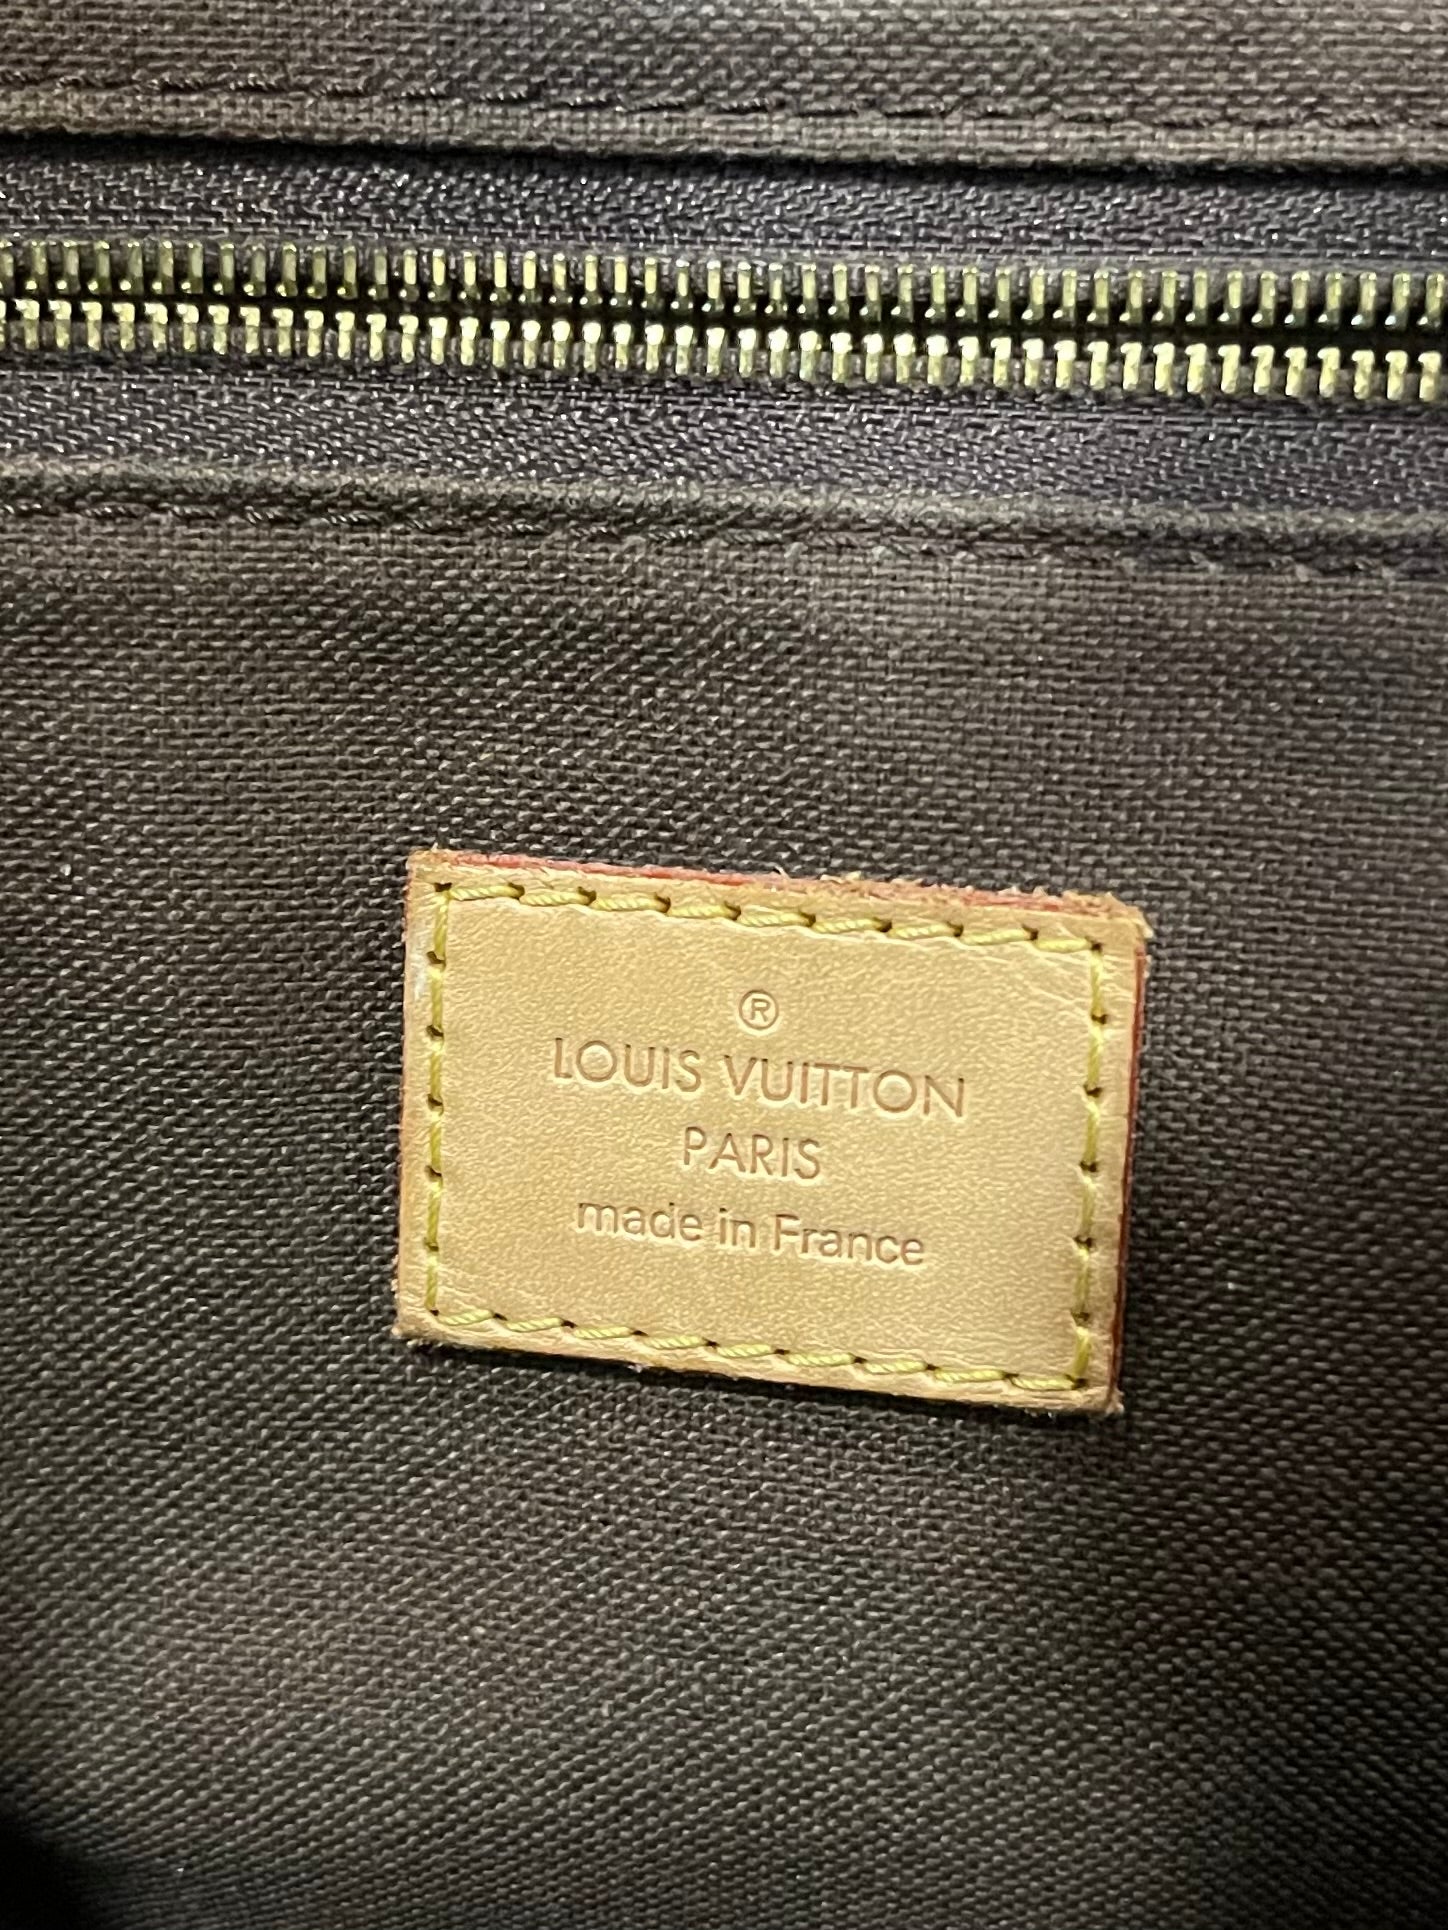 Carryall MM arrived! : r/Louisvuitton